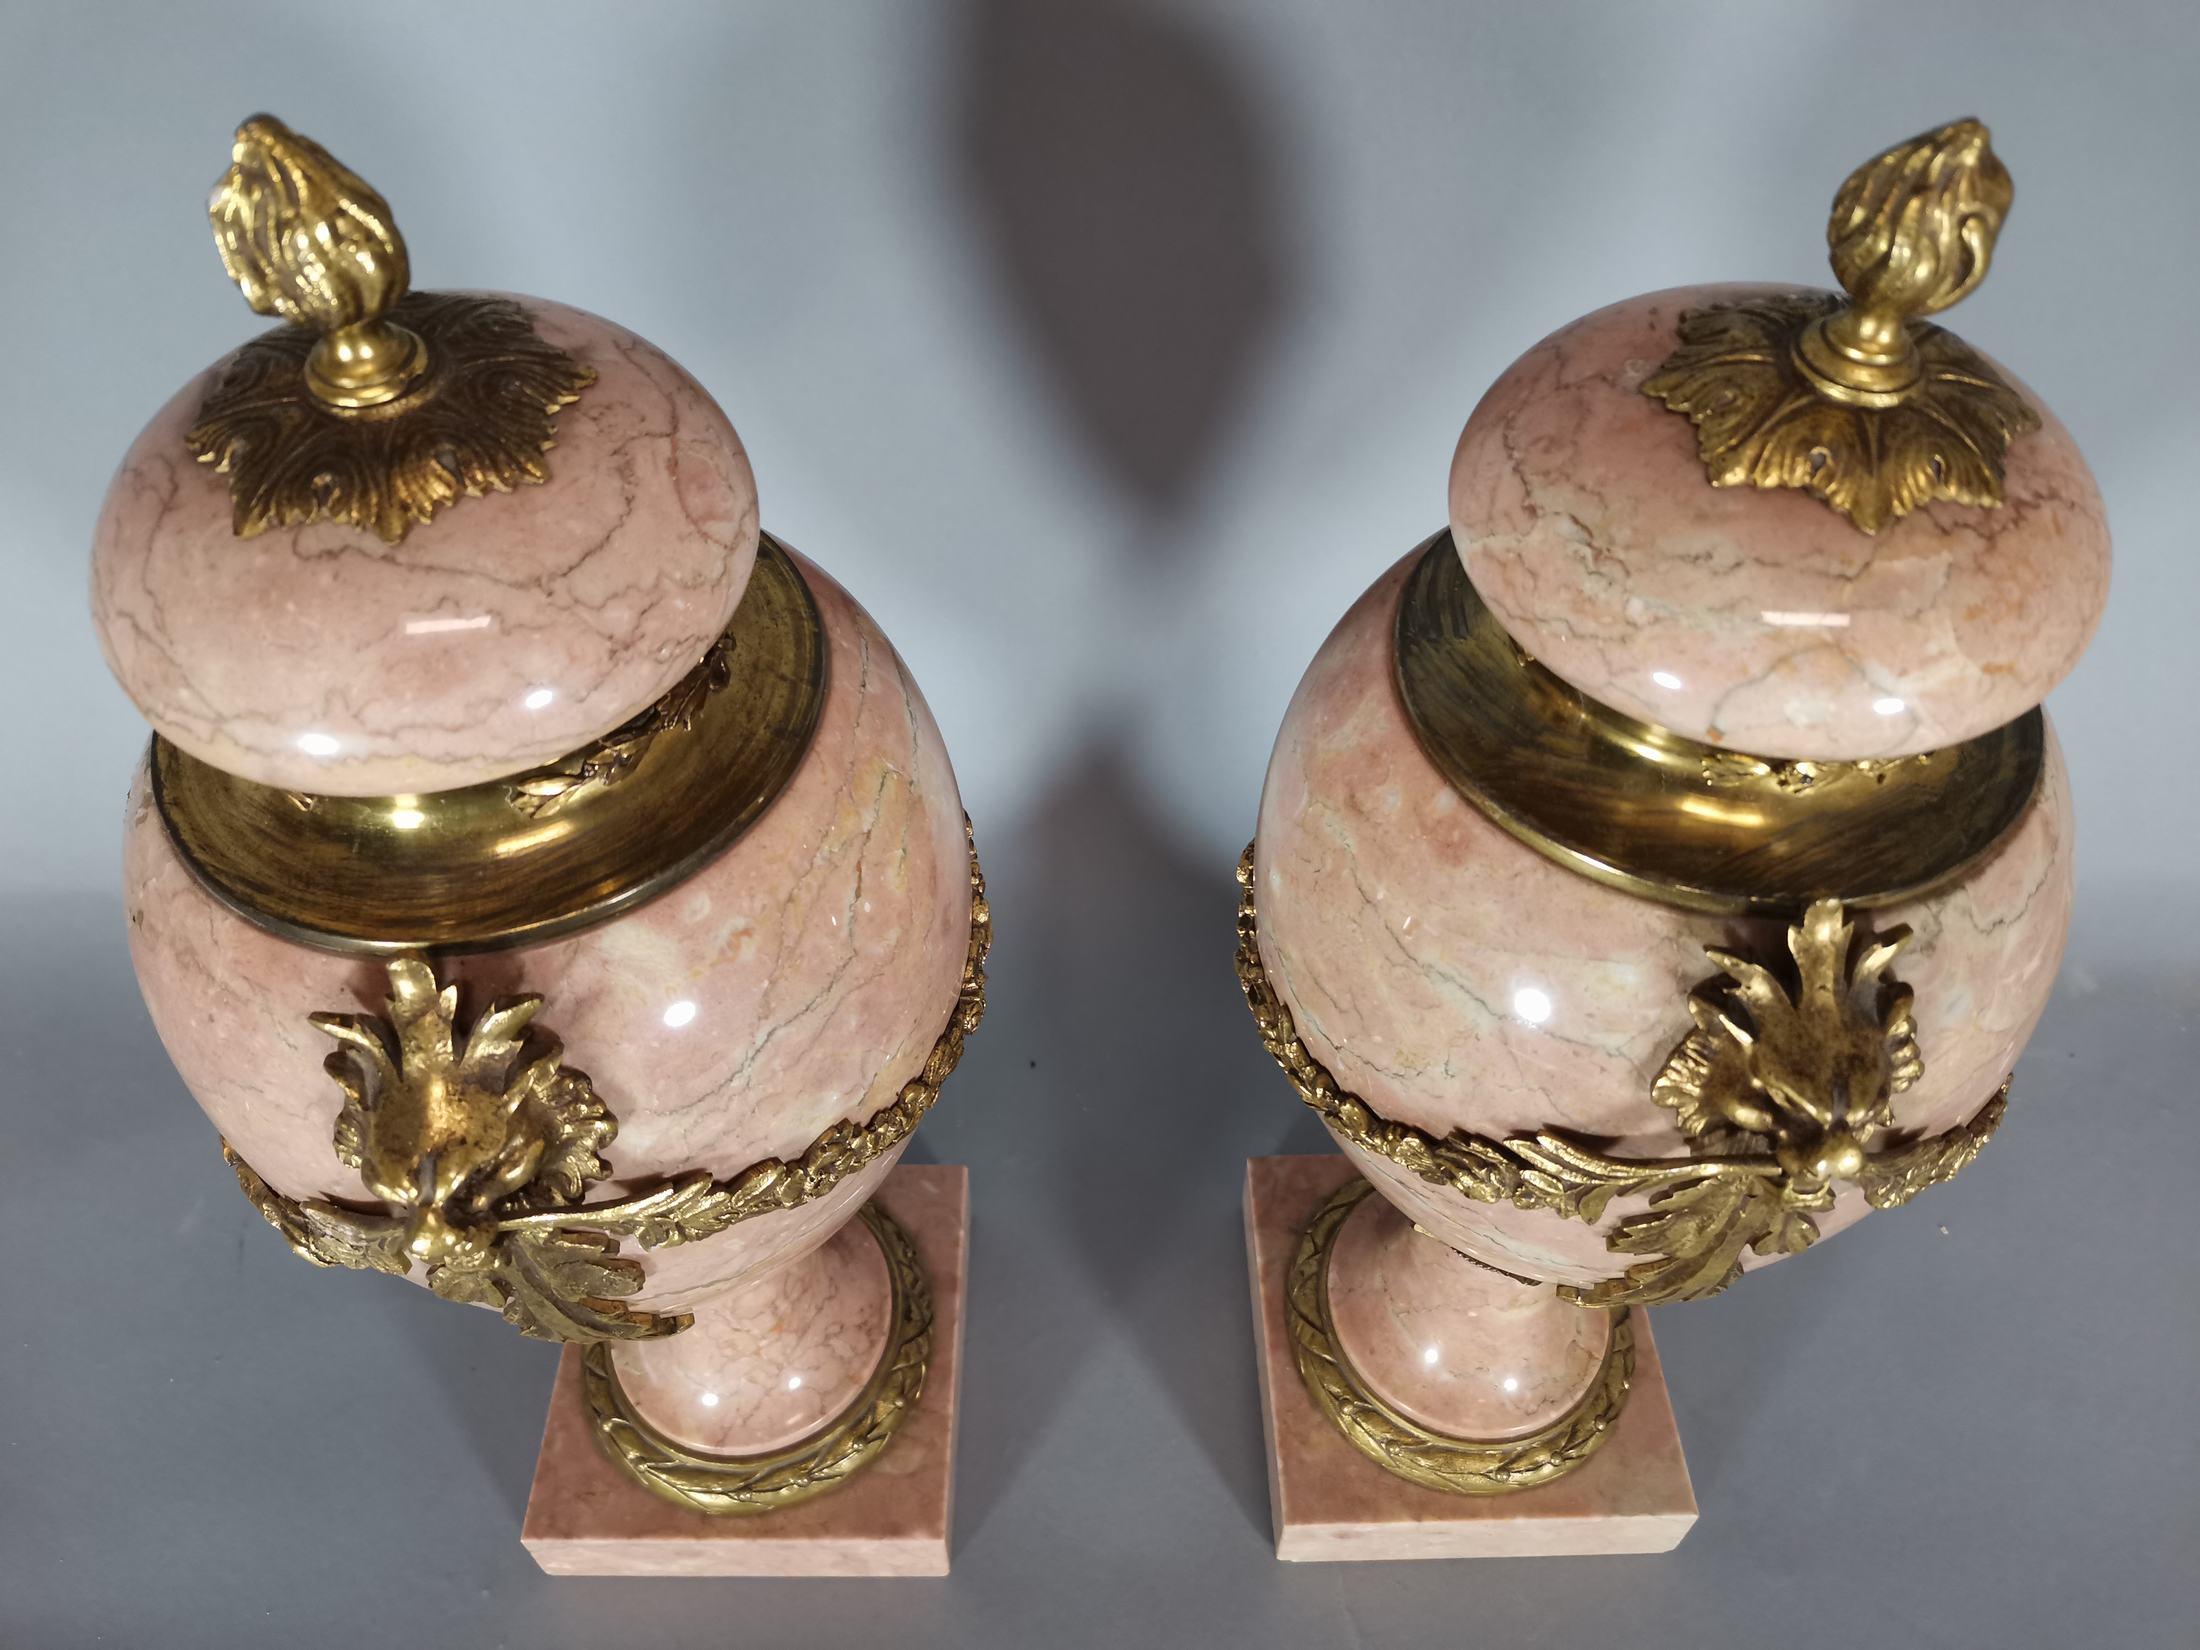 Pair of marble and gild bronze vase from the early 1900, 20th century
Perfect condition
Measures: 44 cm high.